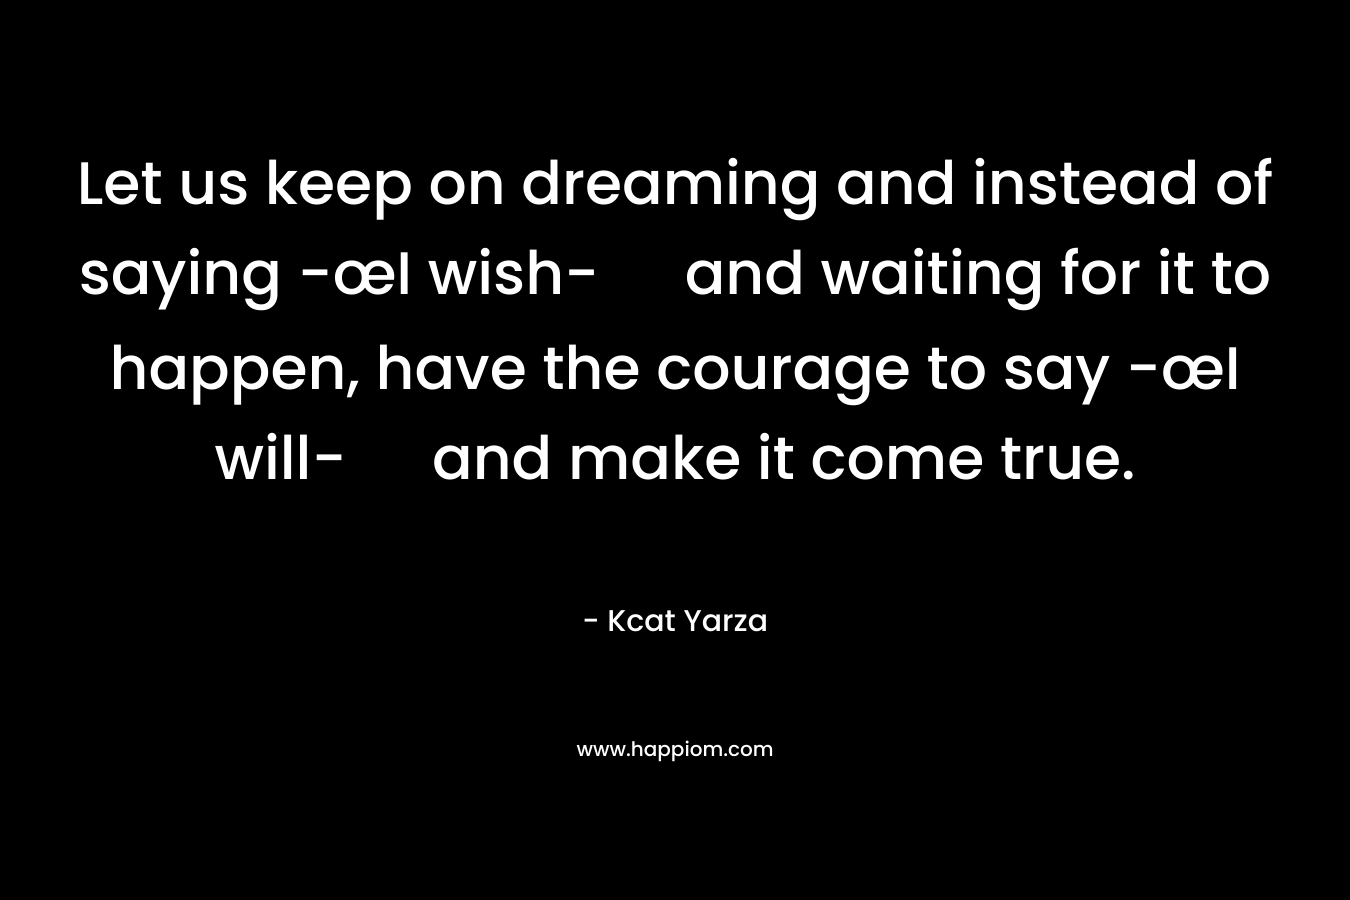 Let us keep on dreaming and instead of saying -œI wish- and waiting for it to happen, have the courage to say -œI will- and make it come true. – Kcat Yarza